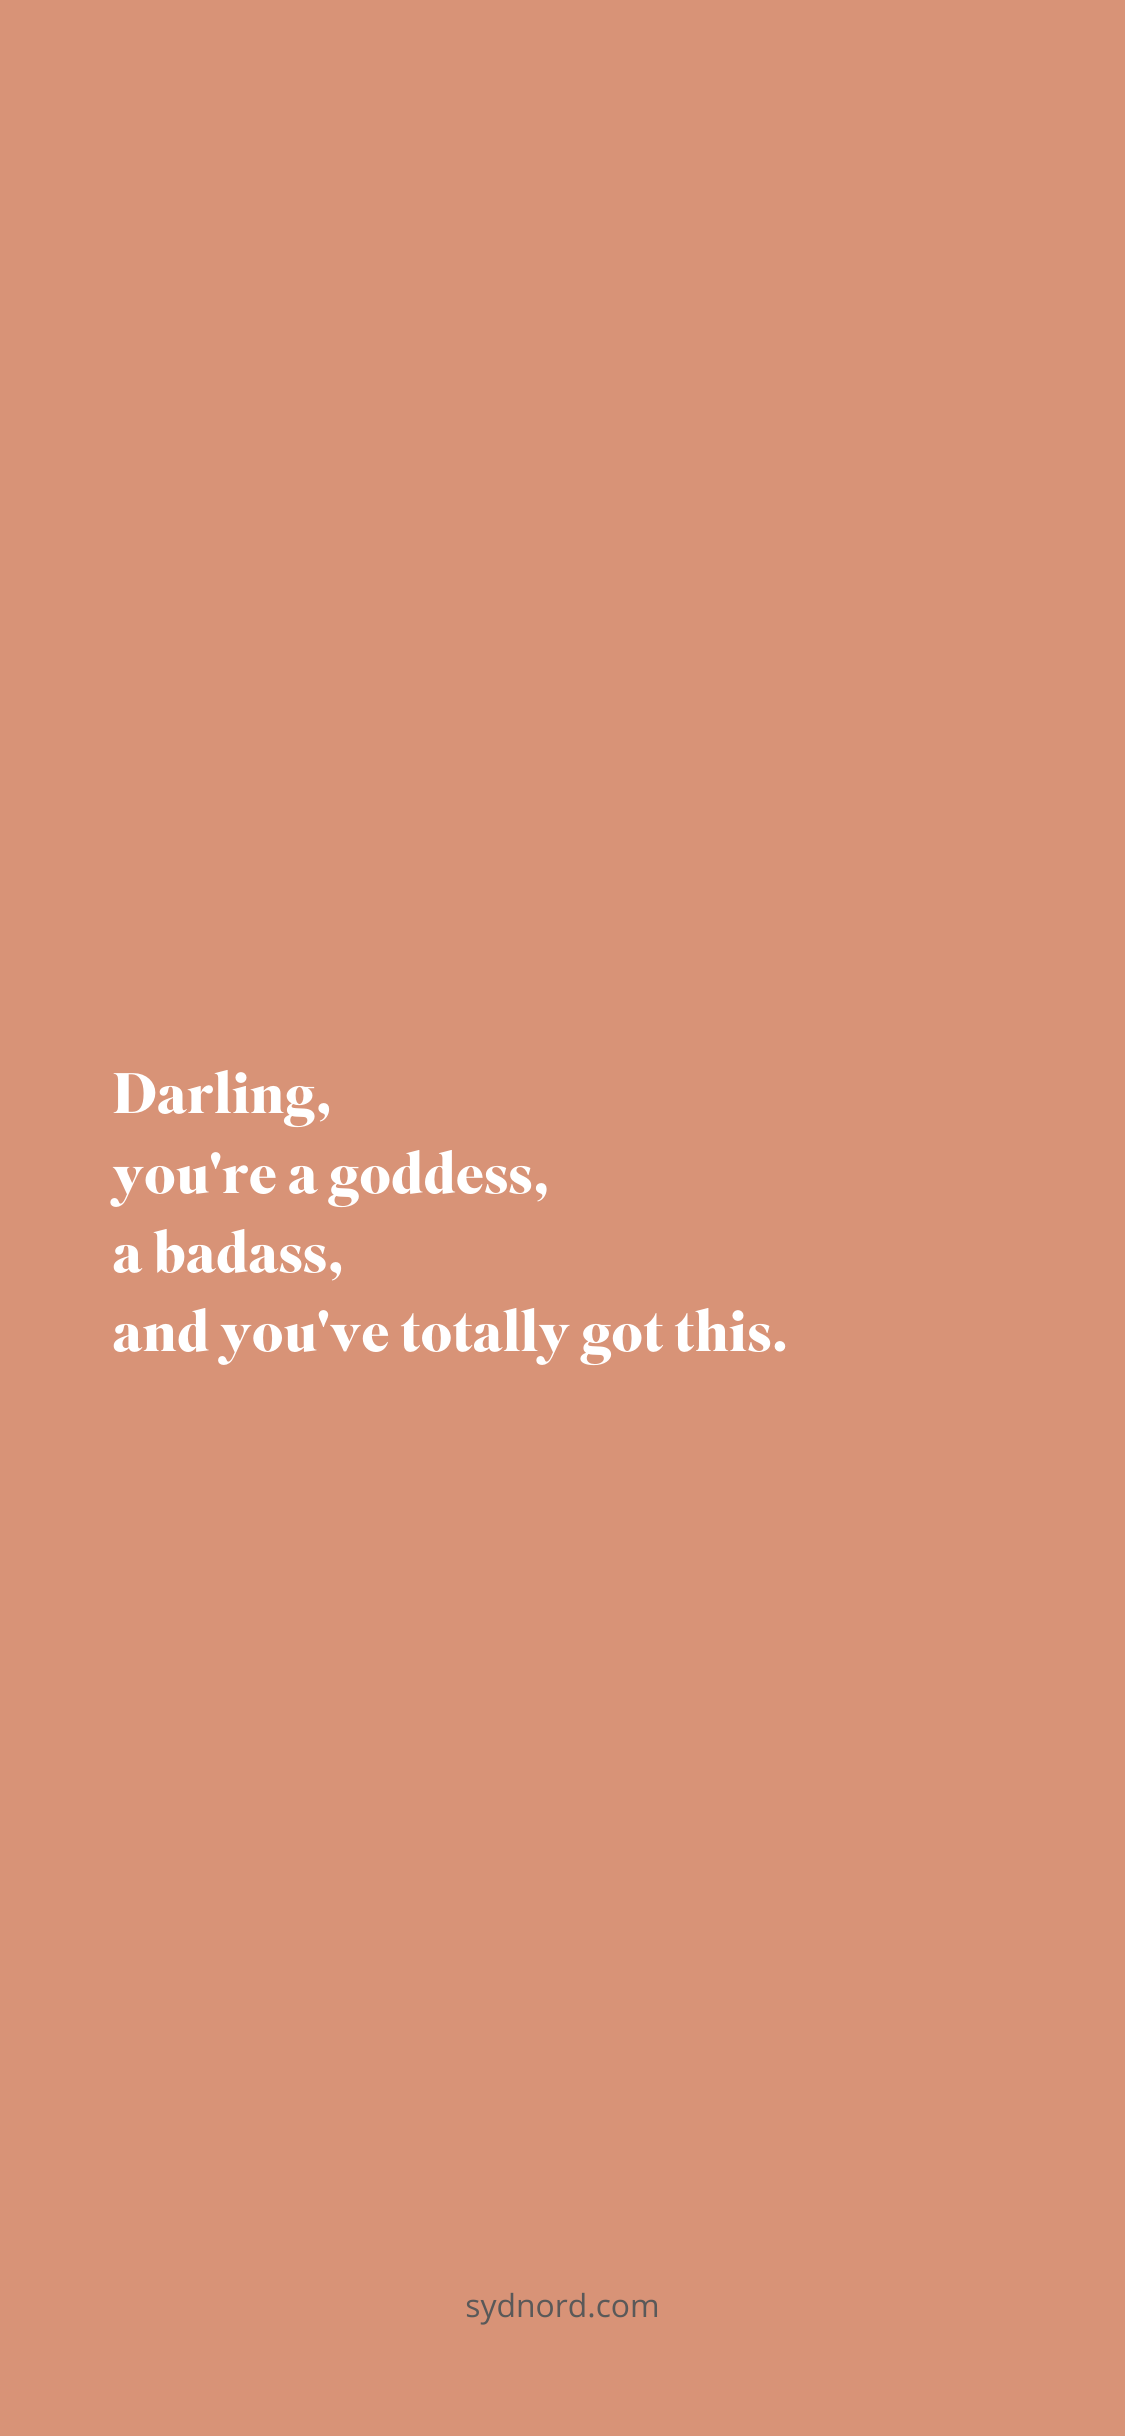 Positive quotes: Darling, you're a goddess, a badass, and you've totally got this.